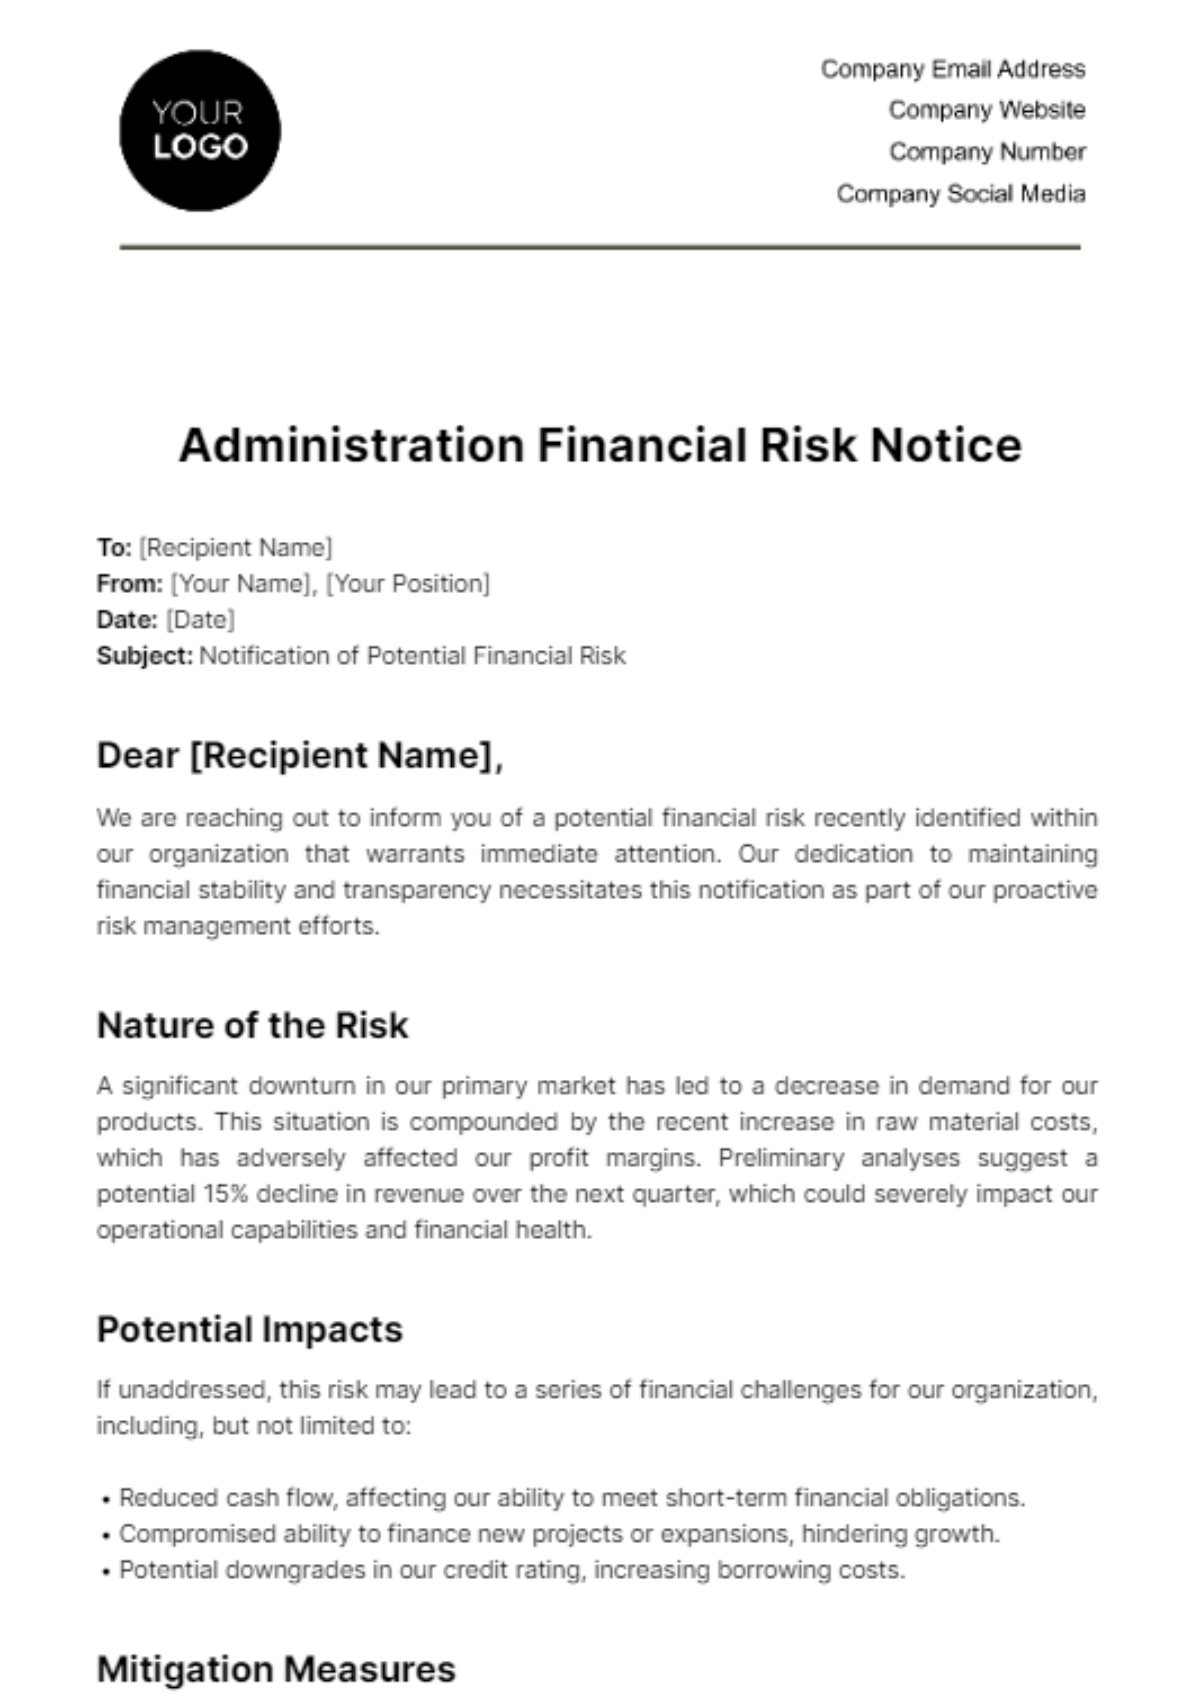 Free Administration Financial Risk Notice Template